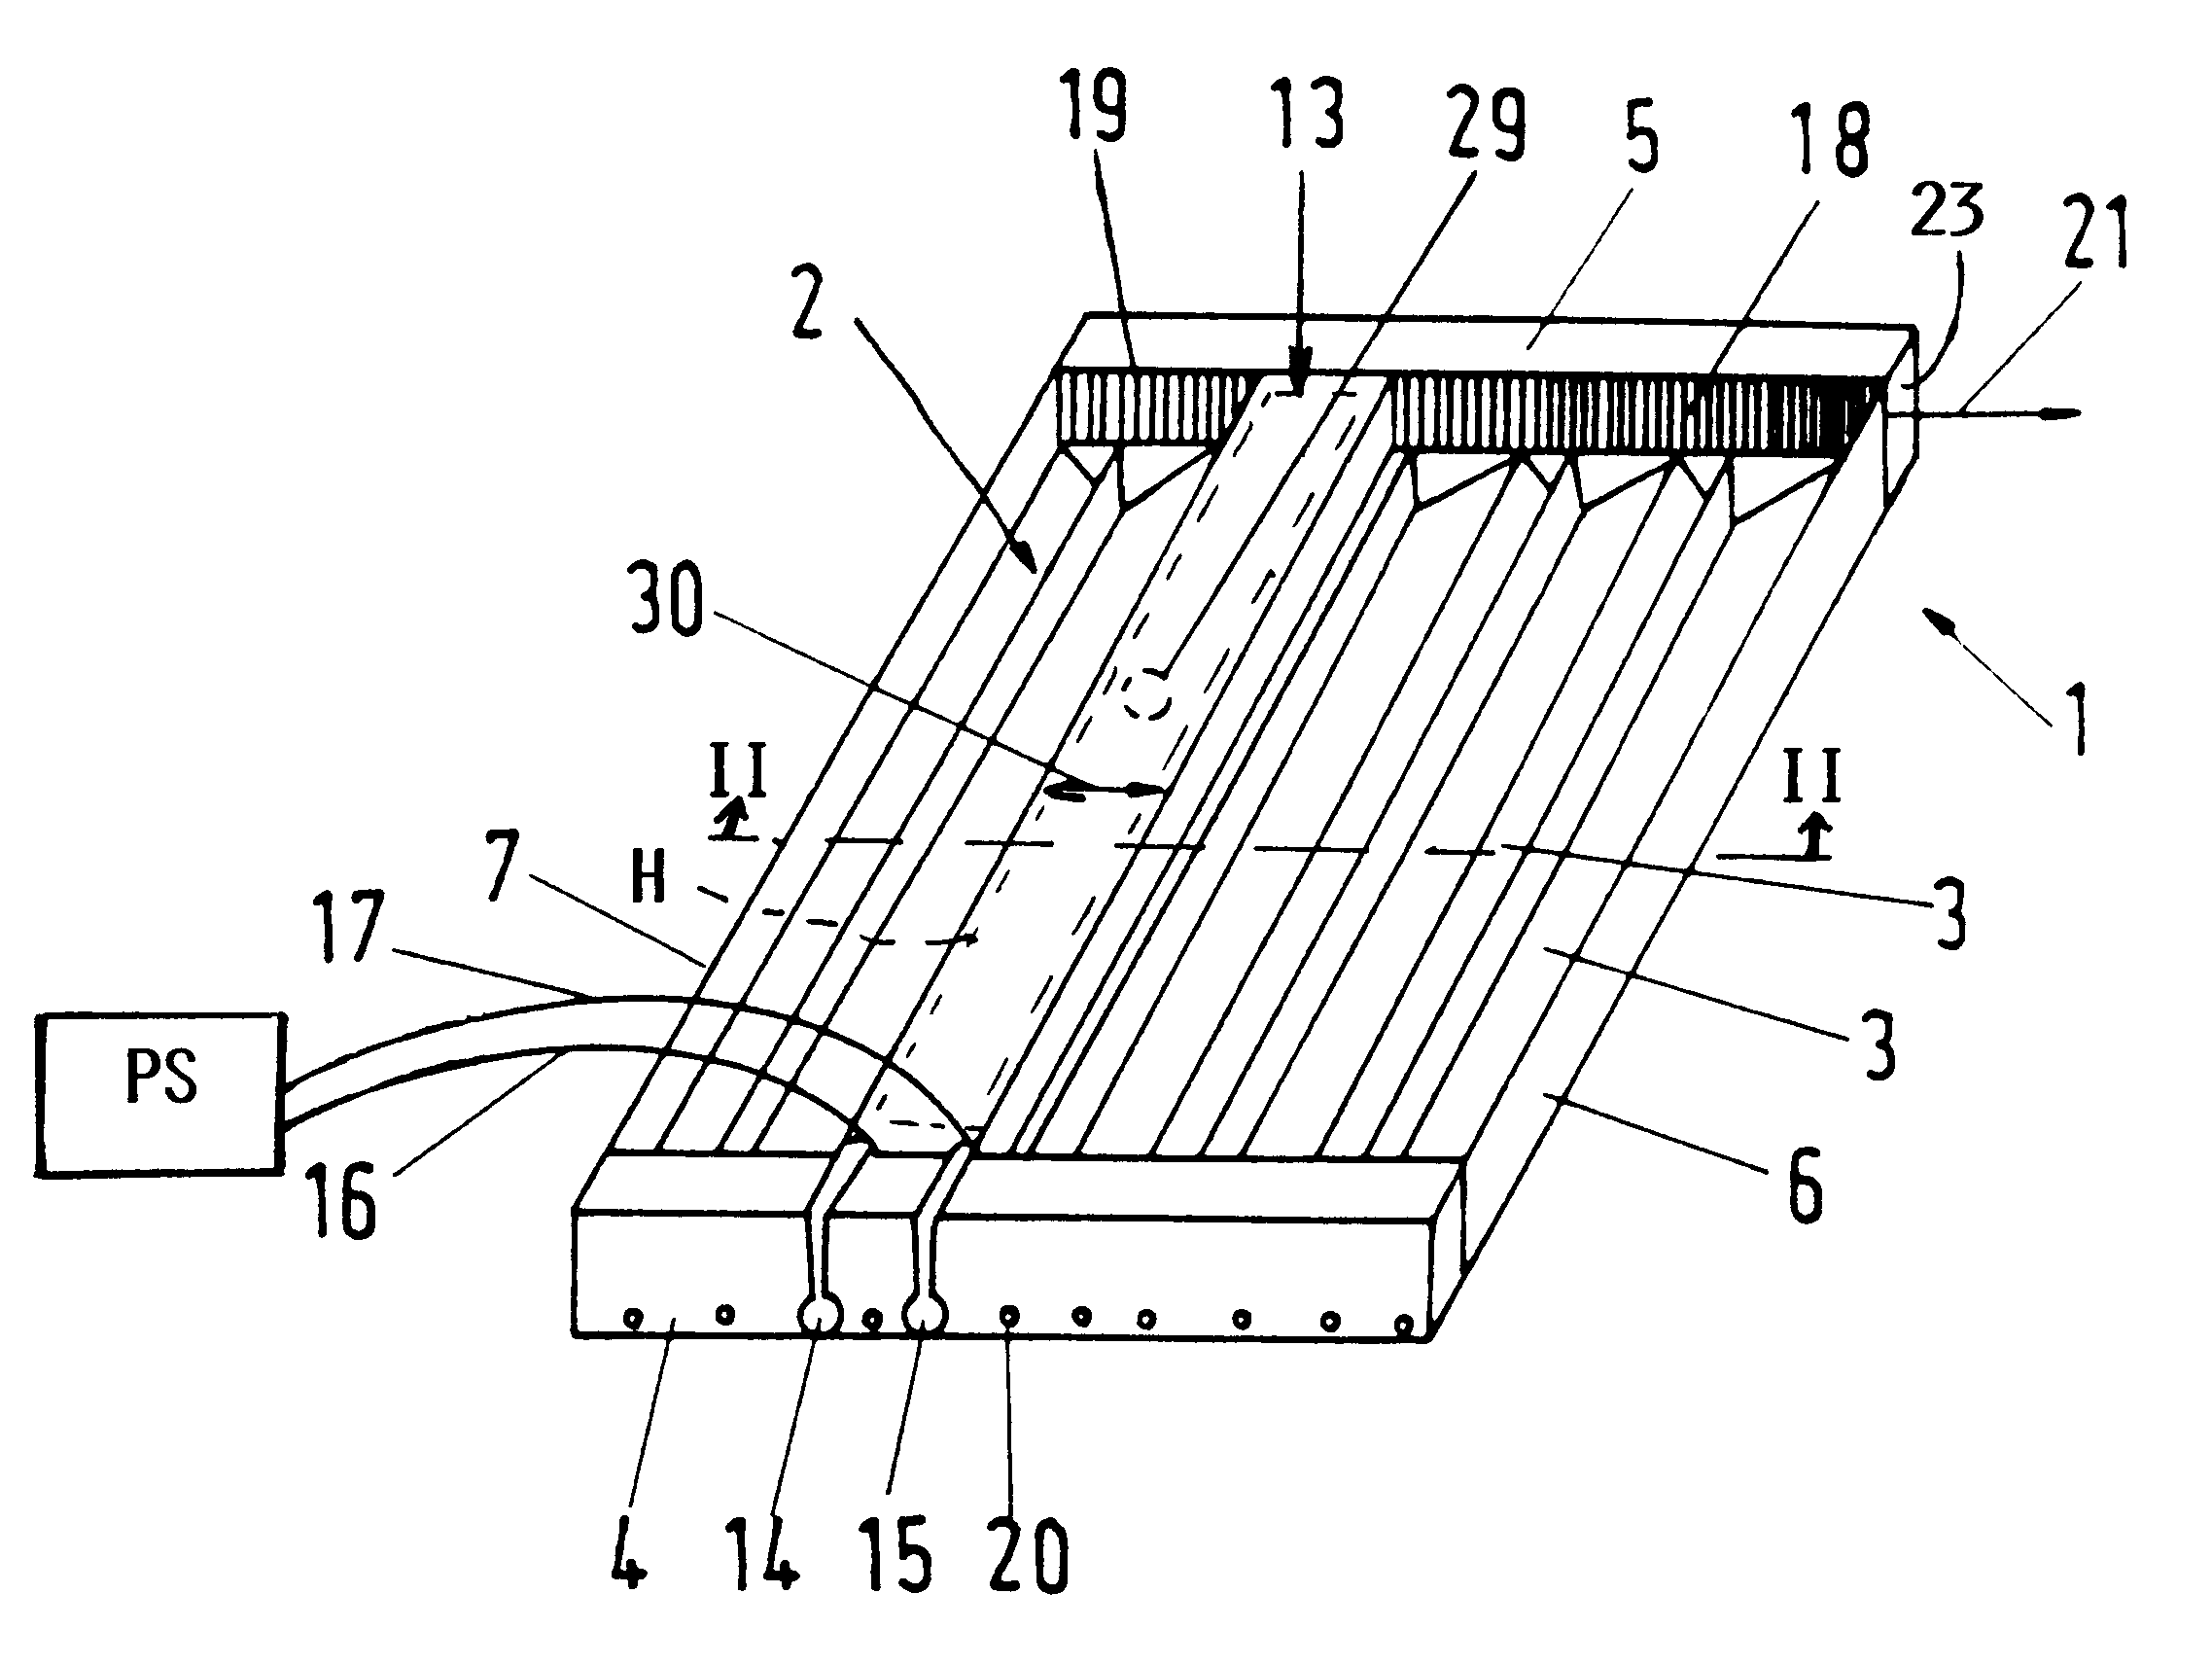 Apparatus for cleaning an airstream